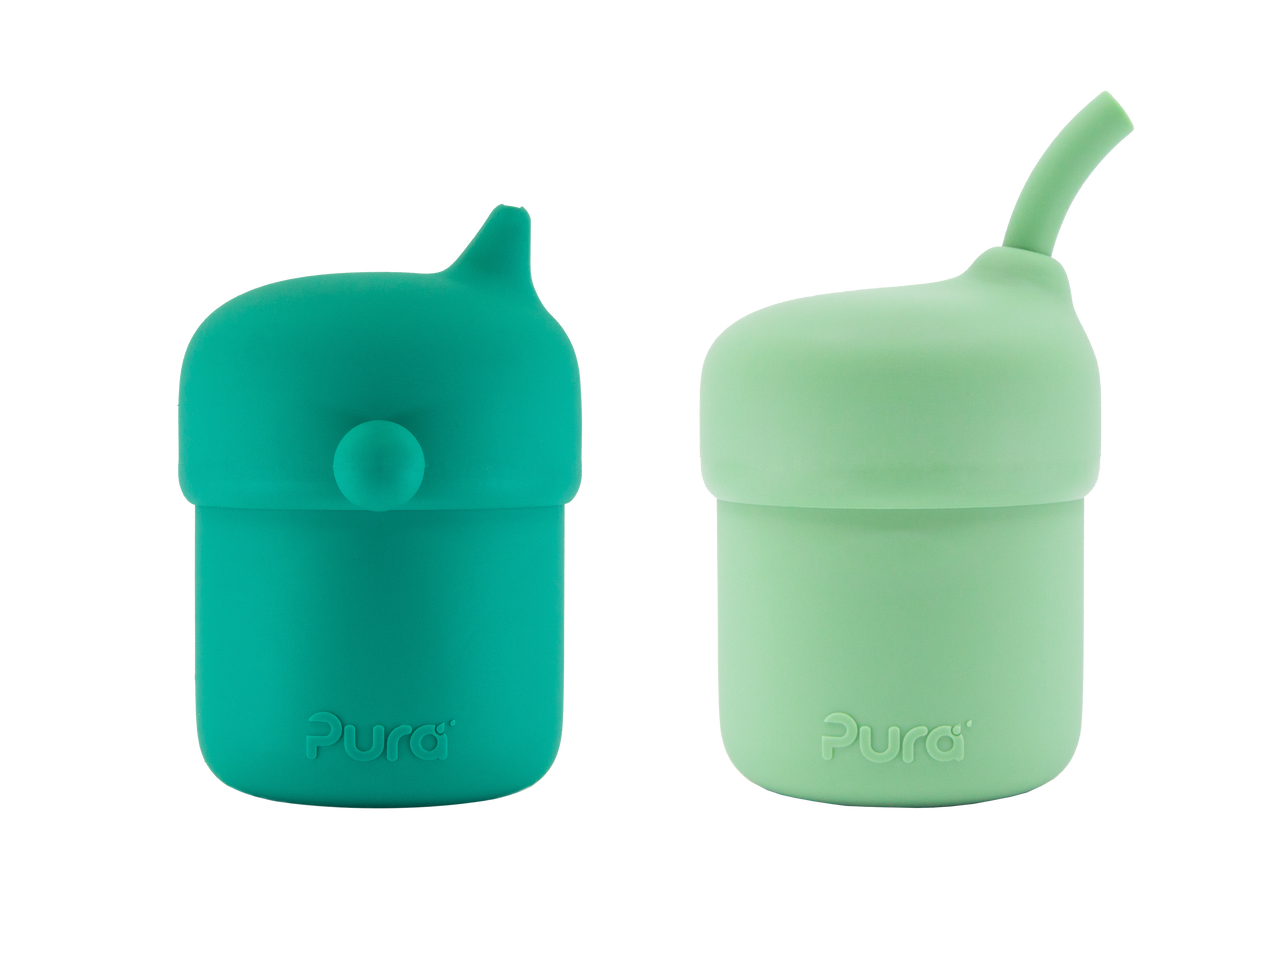 Silikong 8 Oz Silicone No Spill Sippy Cups For Toddlers and Babies |  Dishwasher and Microwave Safe | 2 Pack (Green/Blue)